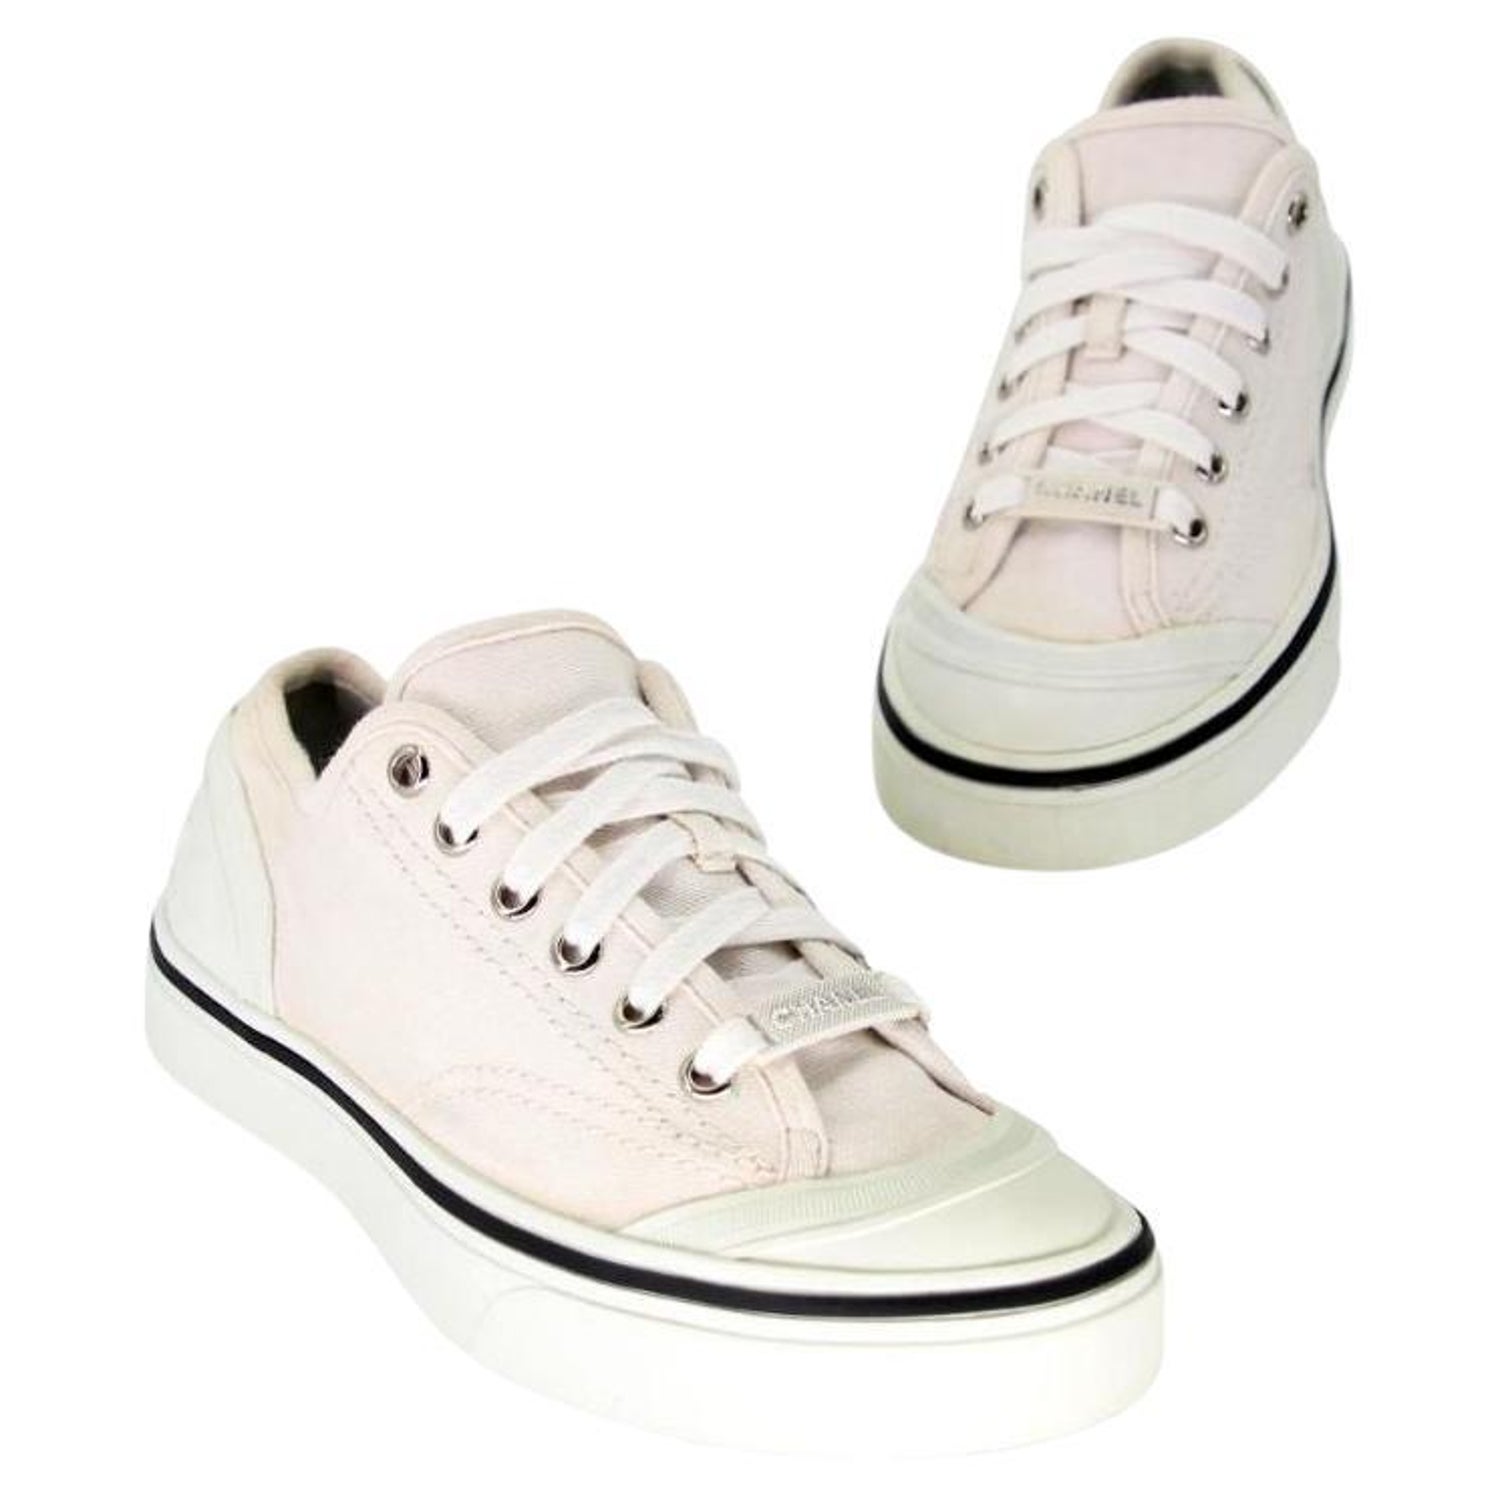 Chanel Tennis Sneakers - 5 For Sale on 1stDibs